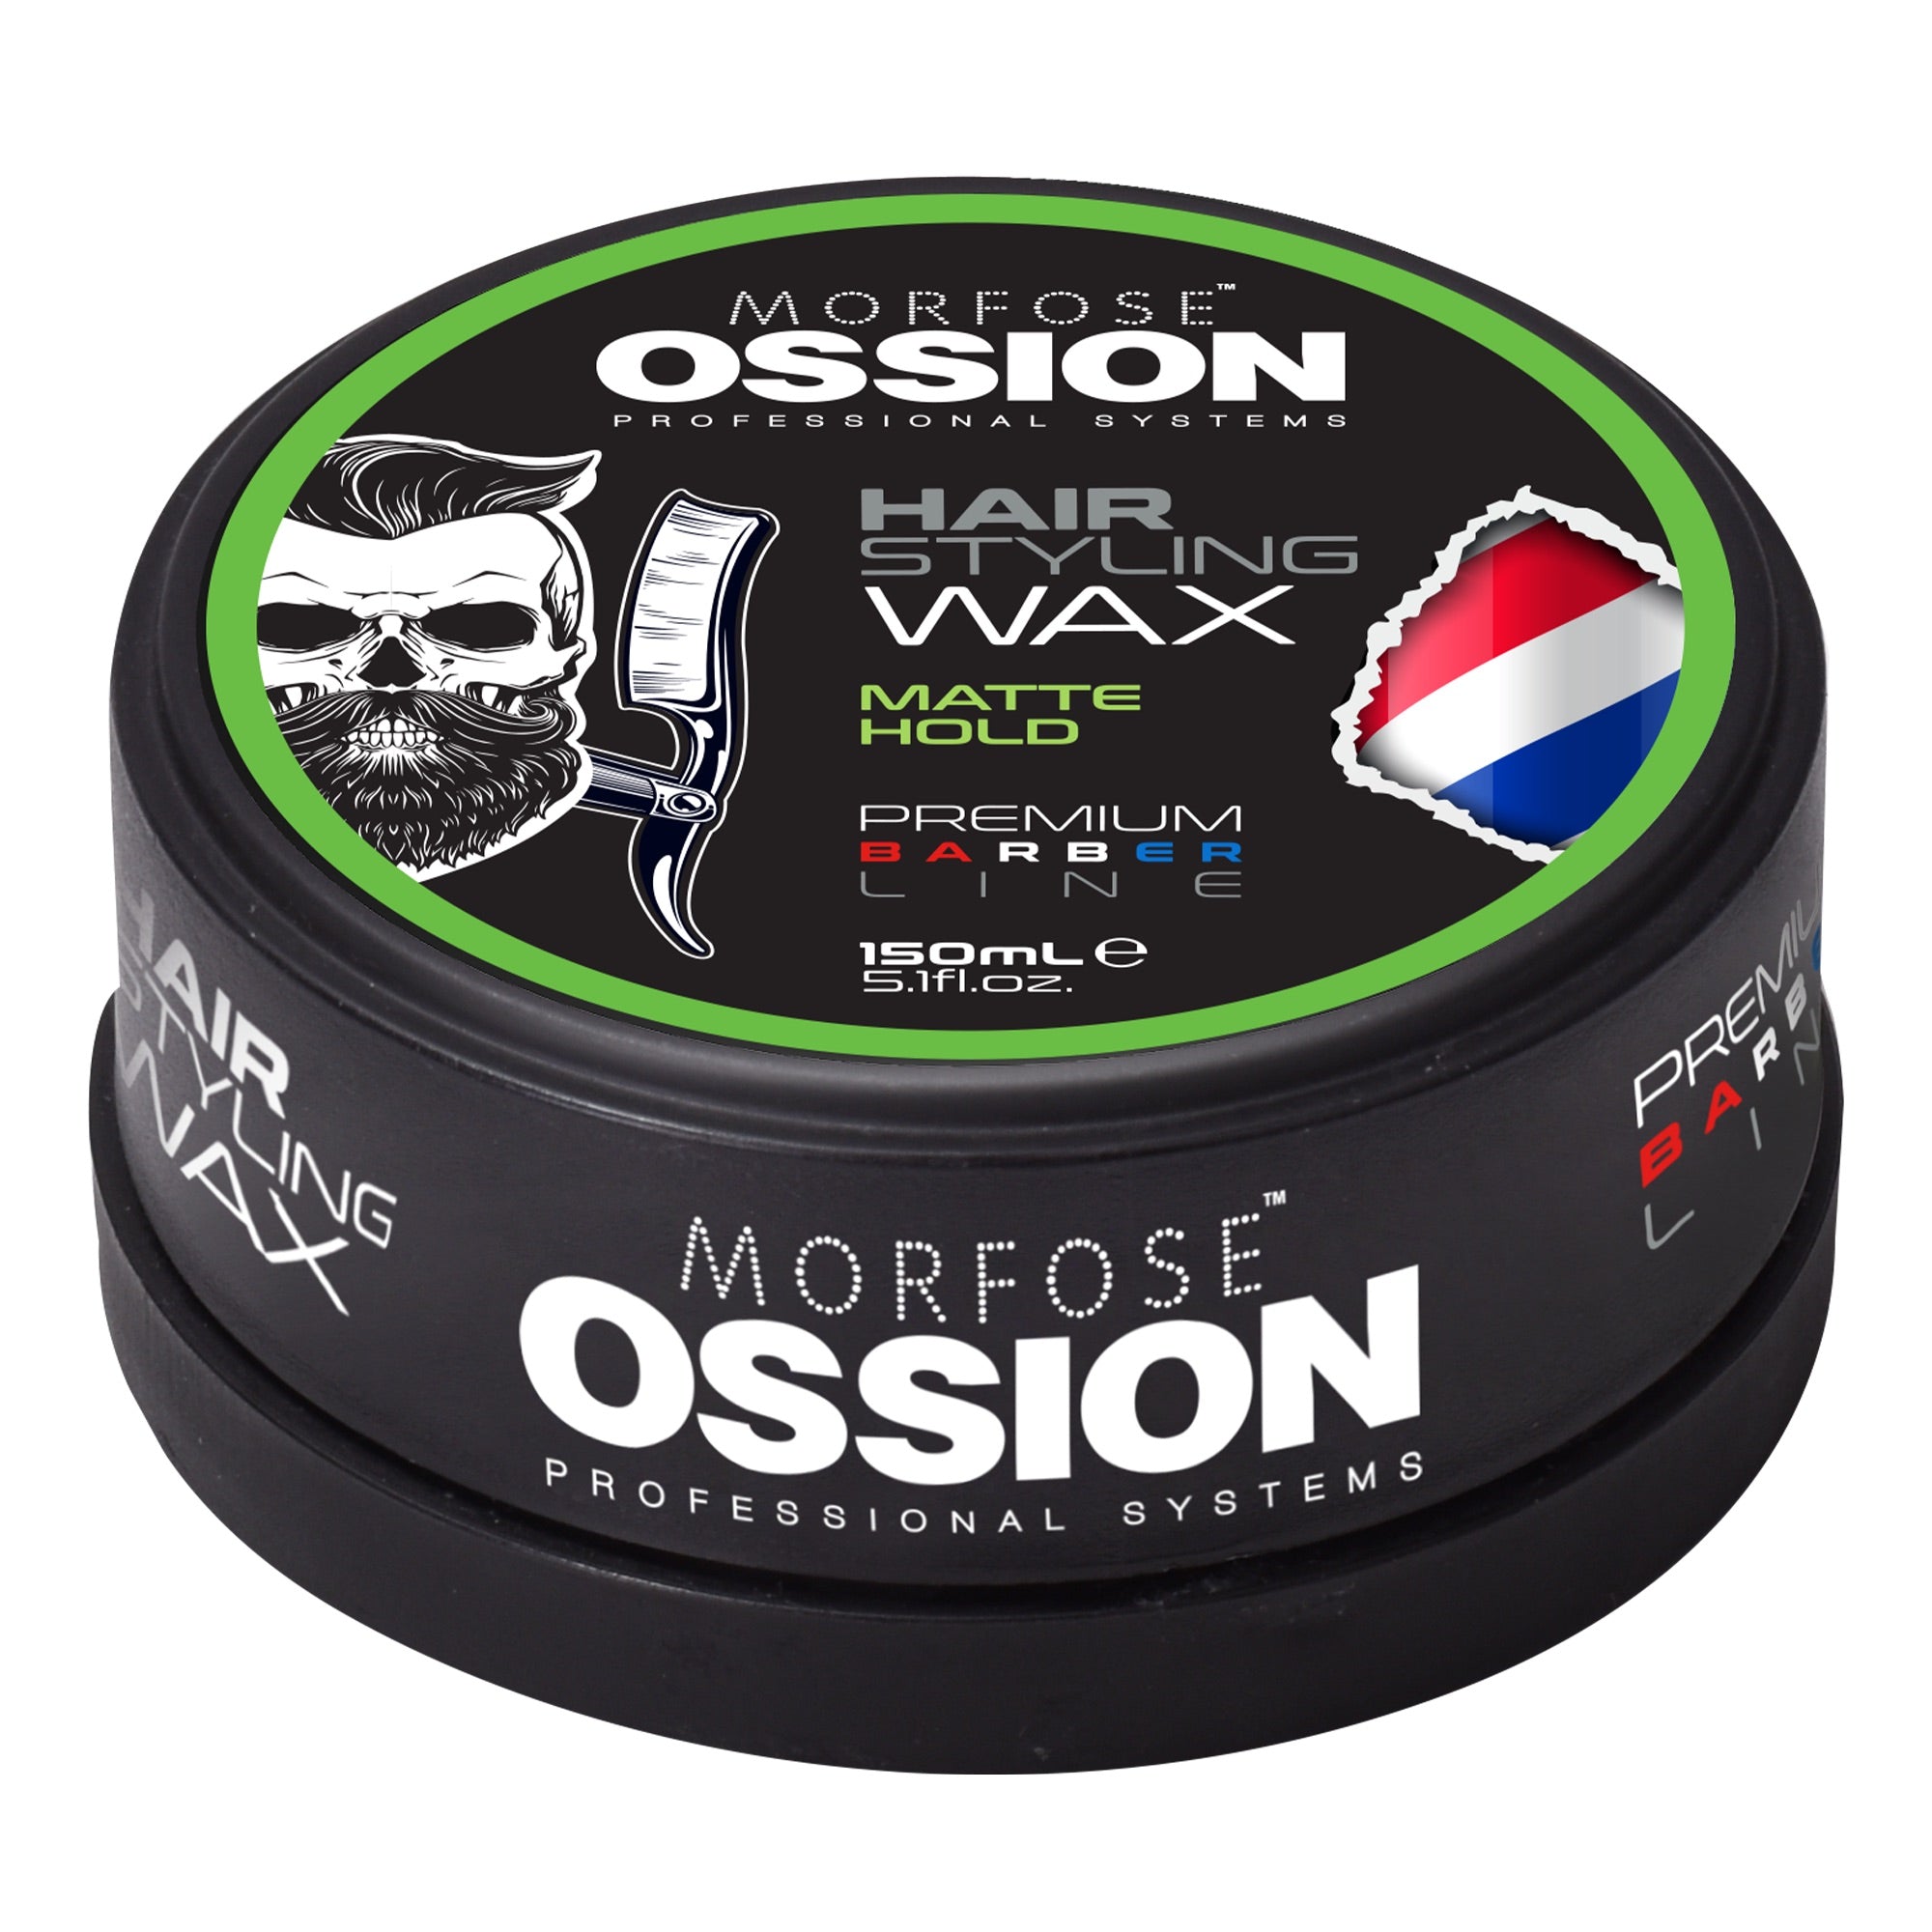 Morfose - Ossion Matte Hold Hair Styling Wax 150ml